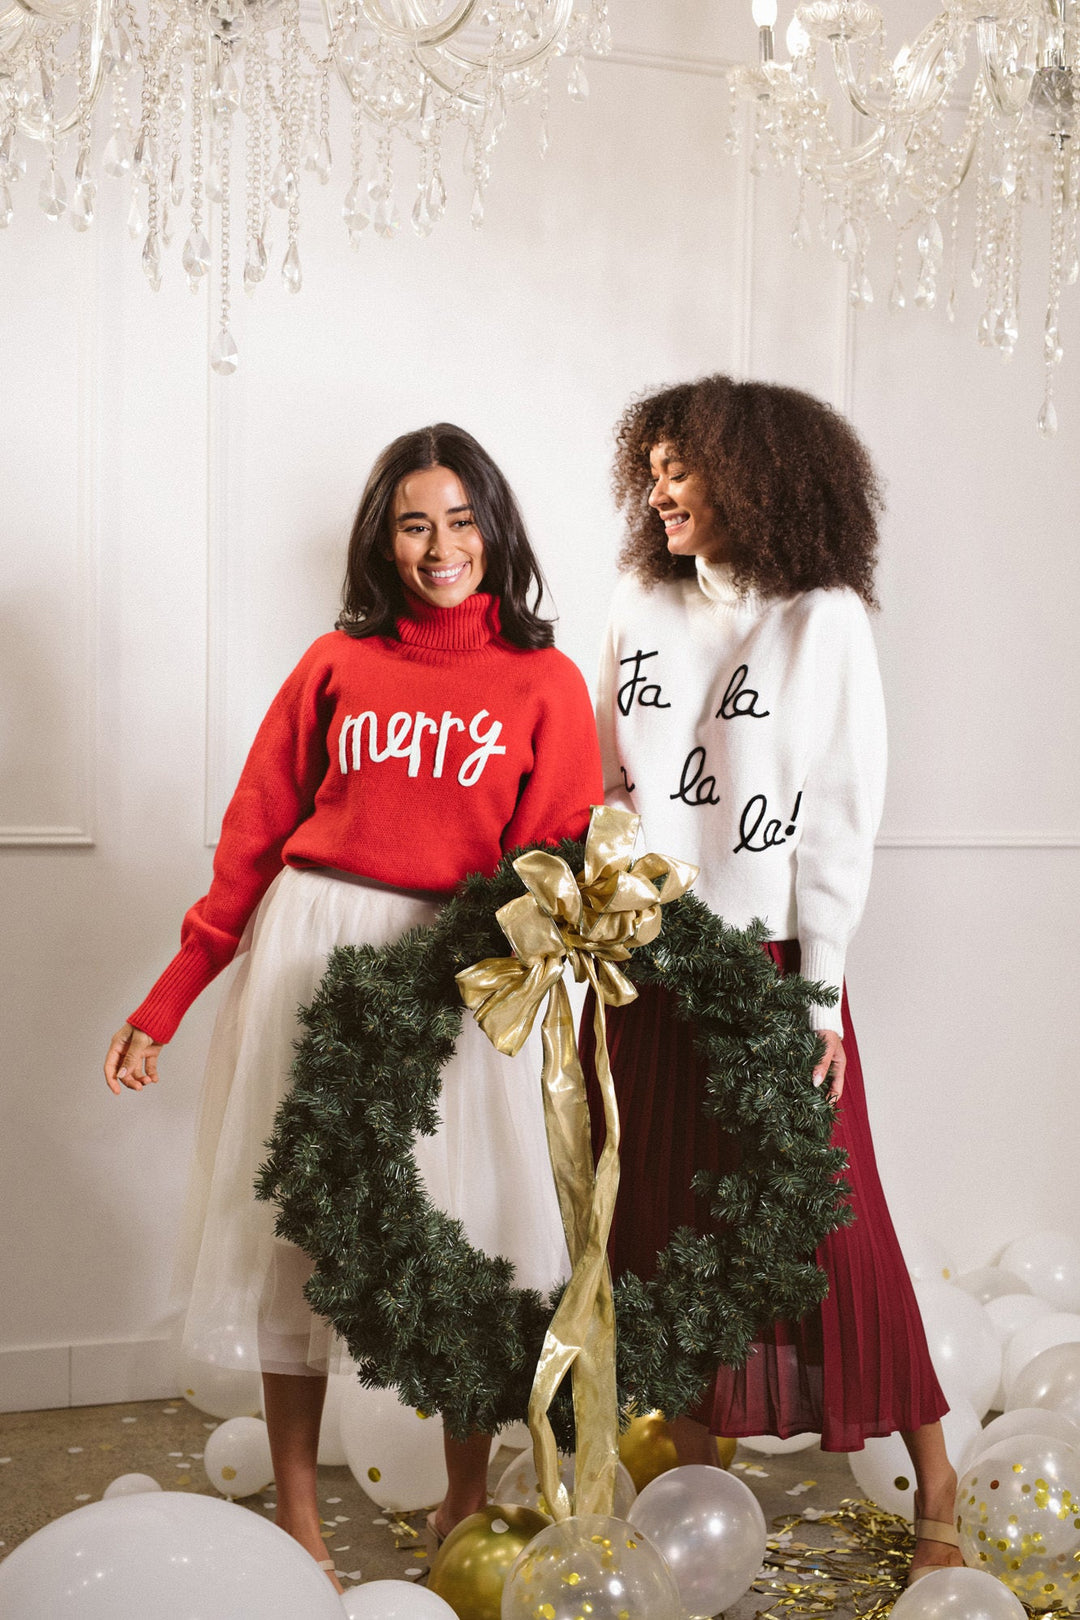 Melody Merry Knit Sweater